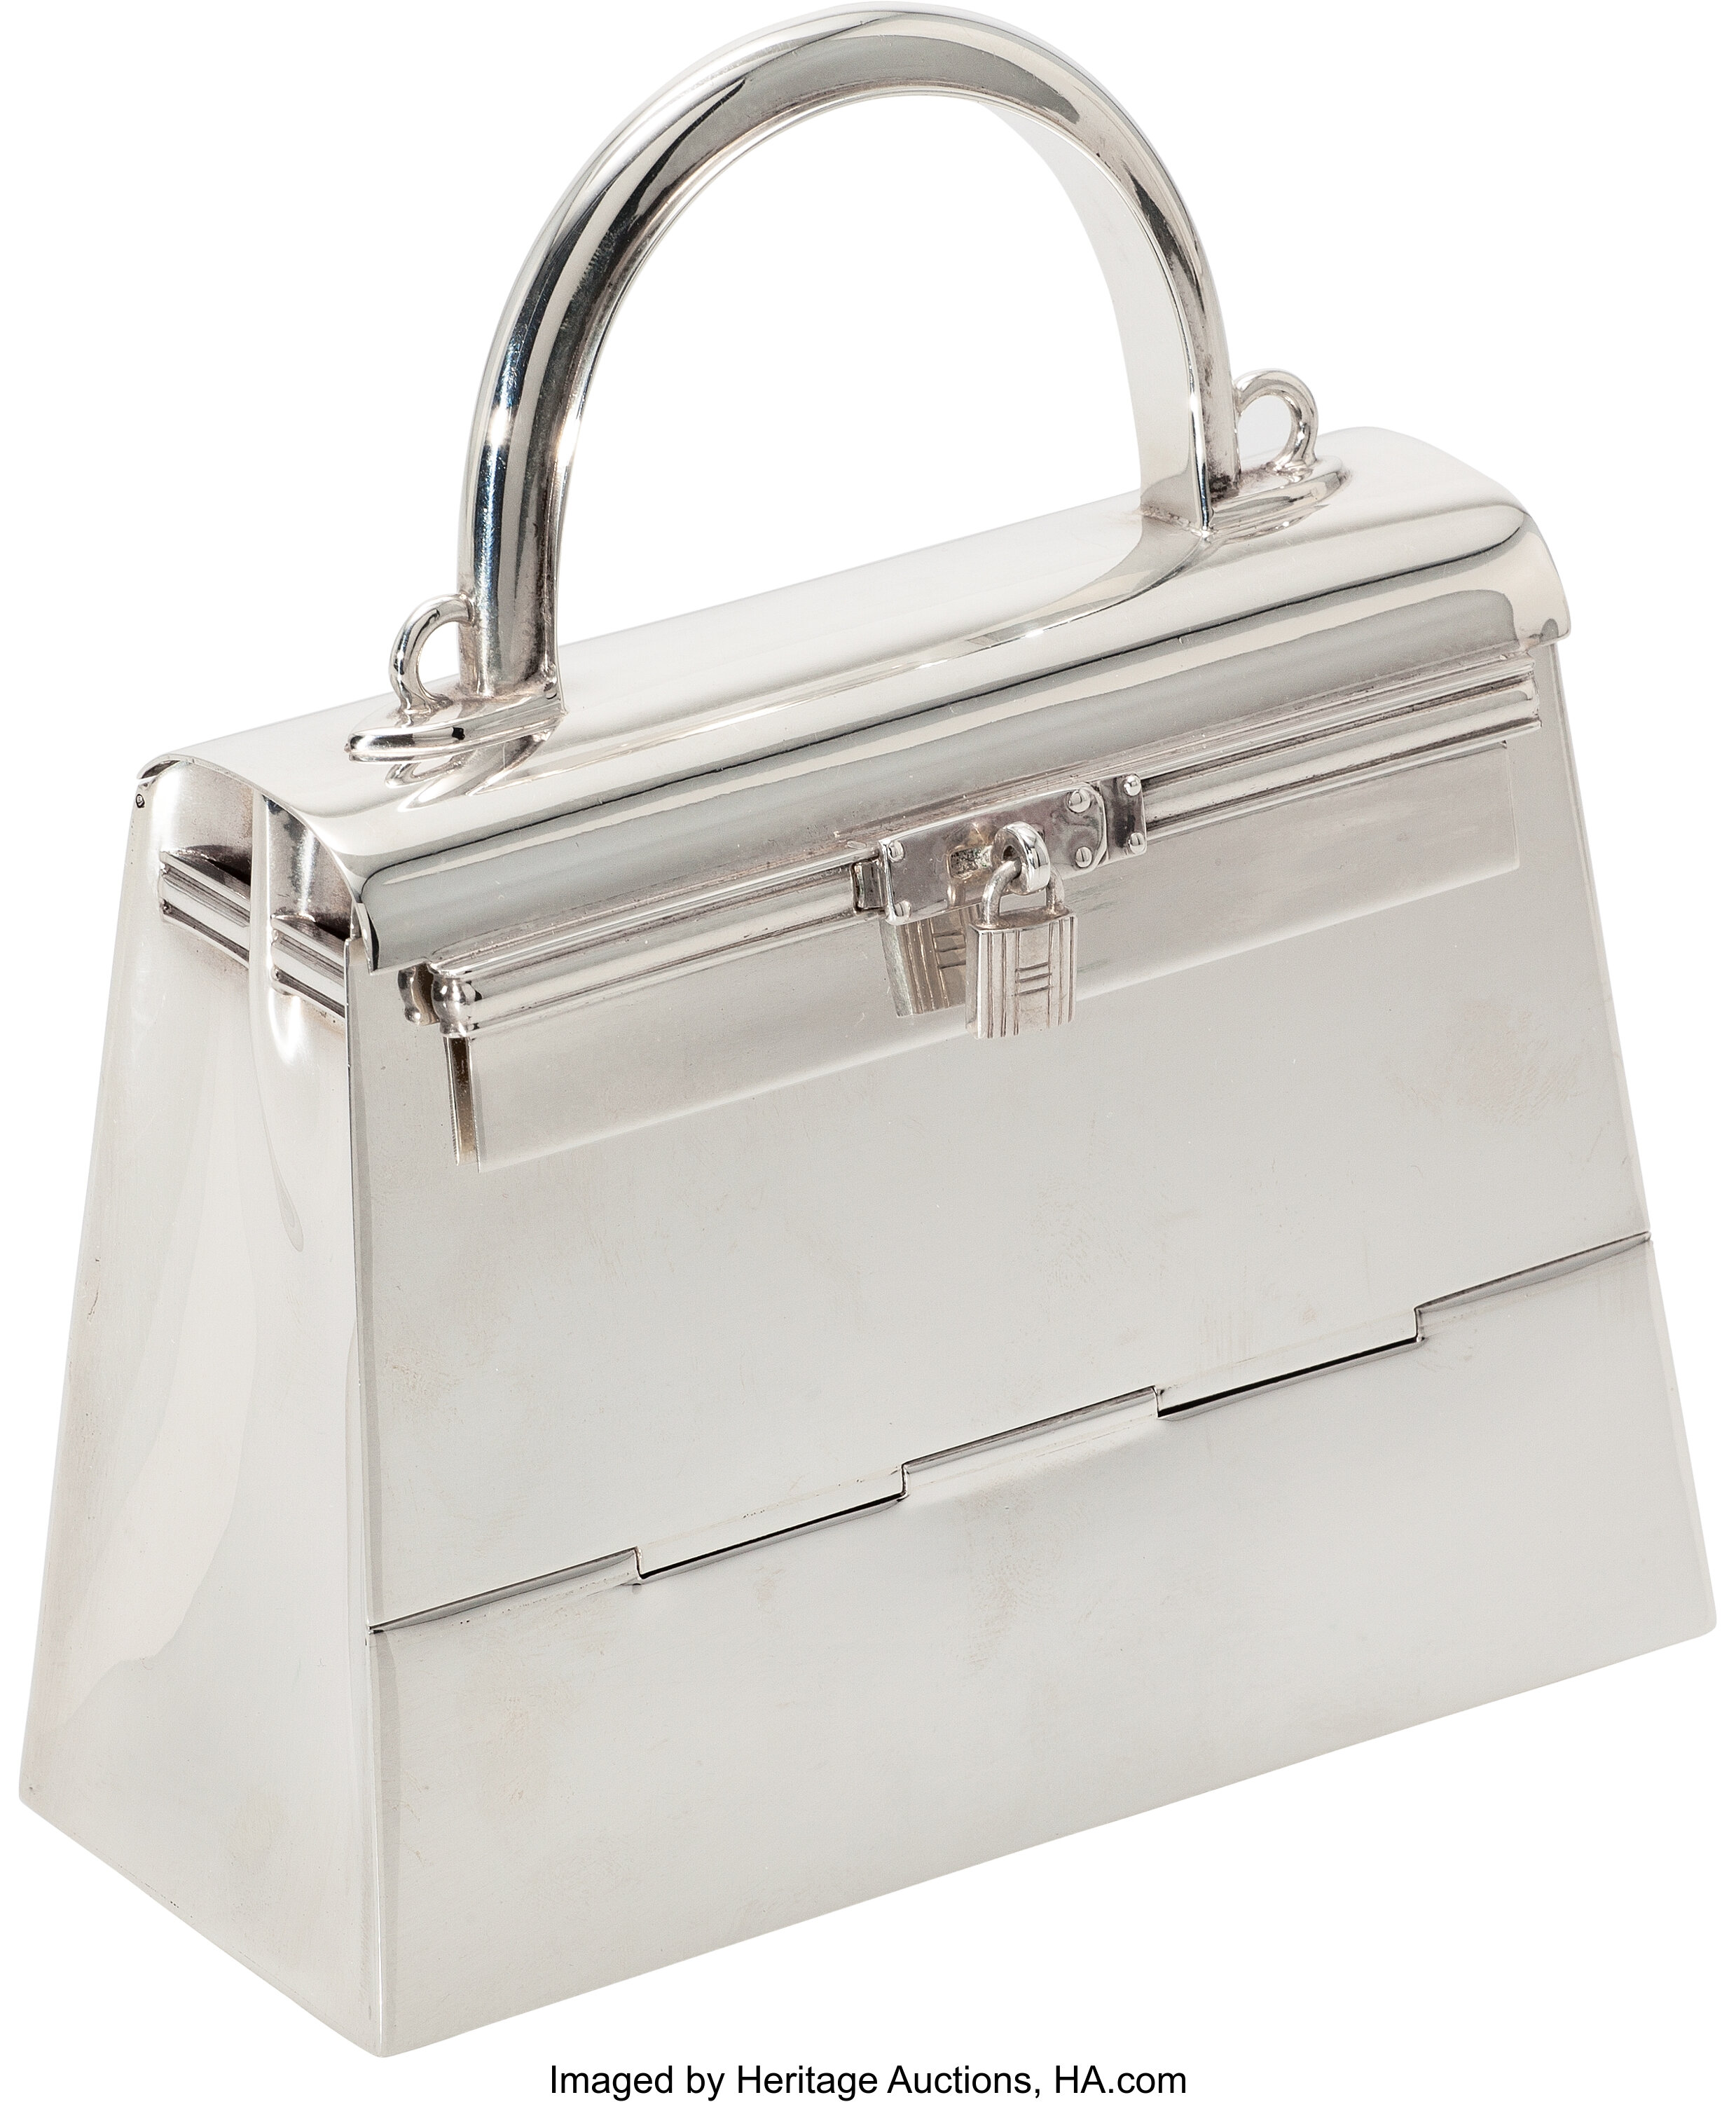 Hermes Ultra Rare Limited Edition Sterling Silver Mini Kelly Bag | Lot ...